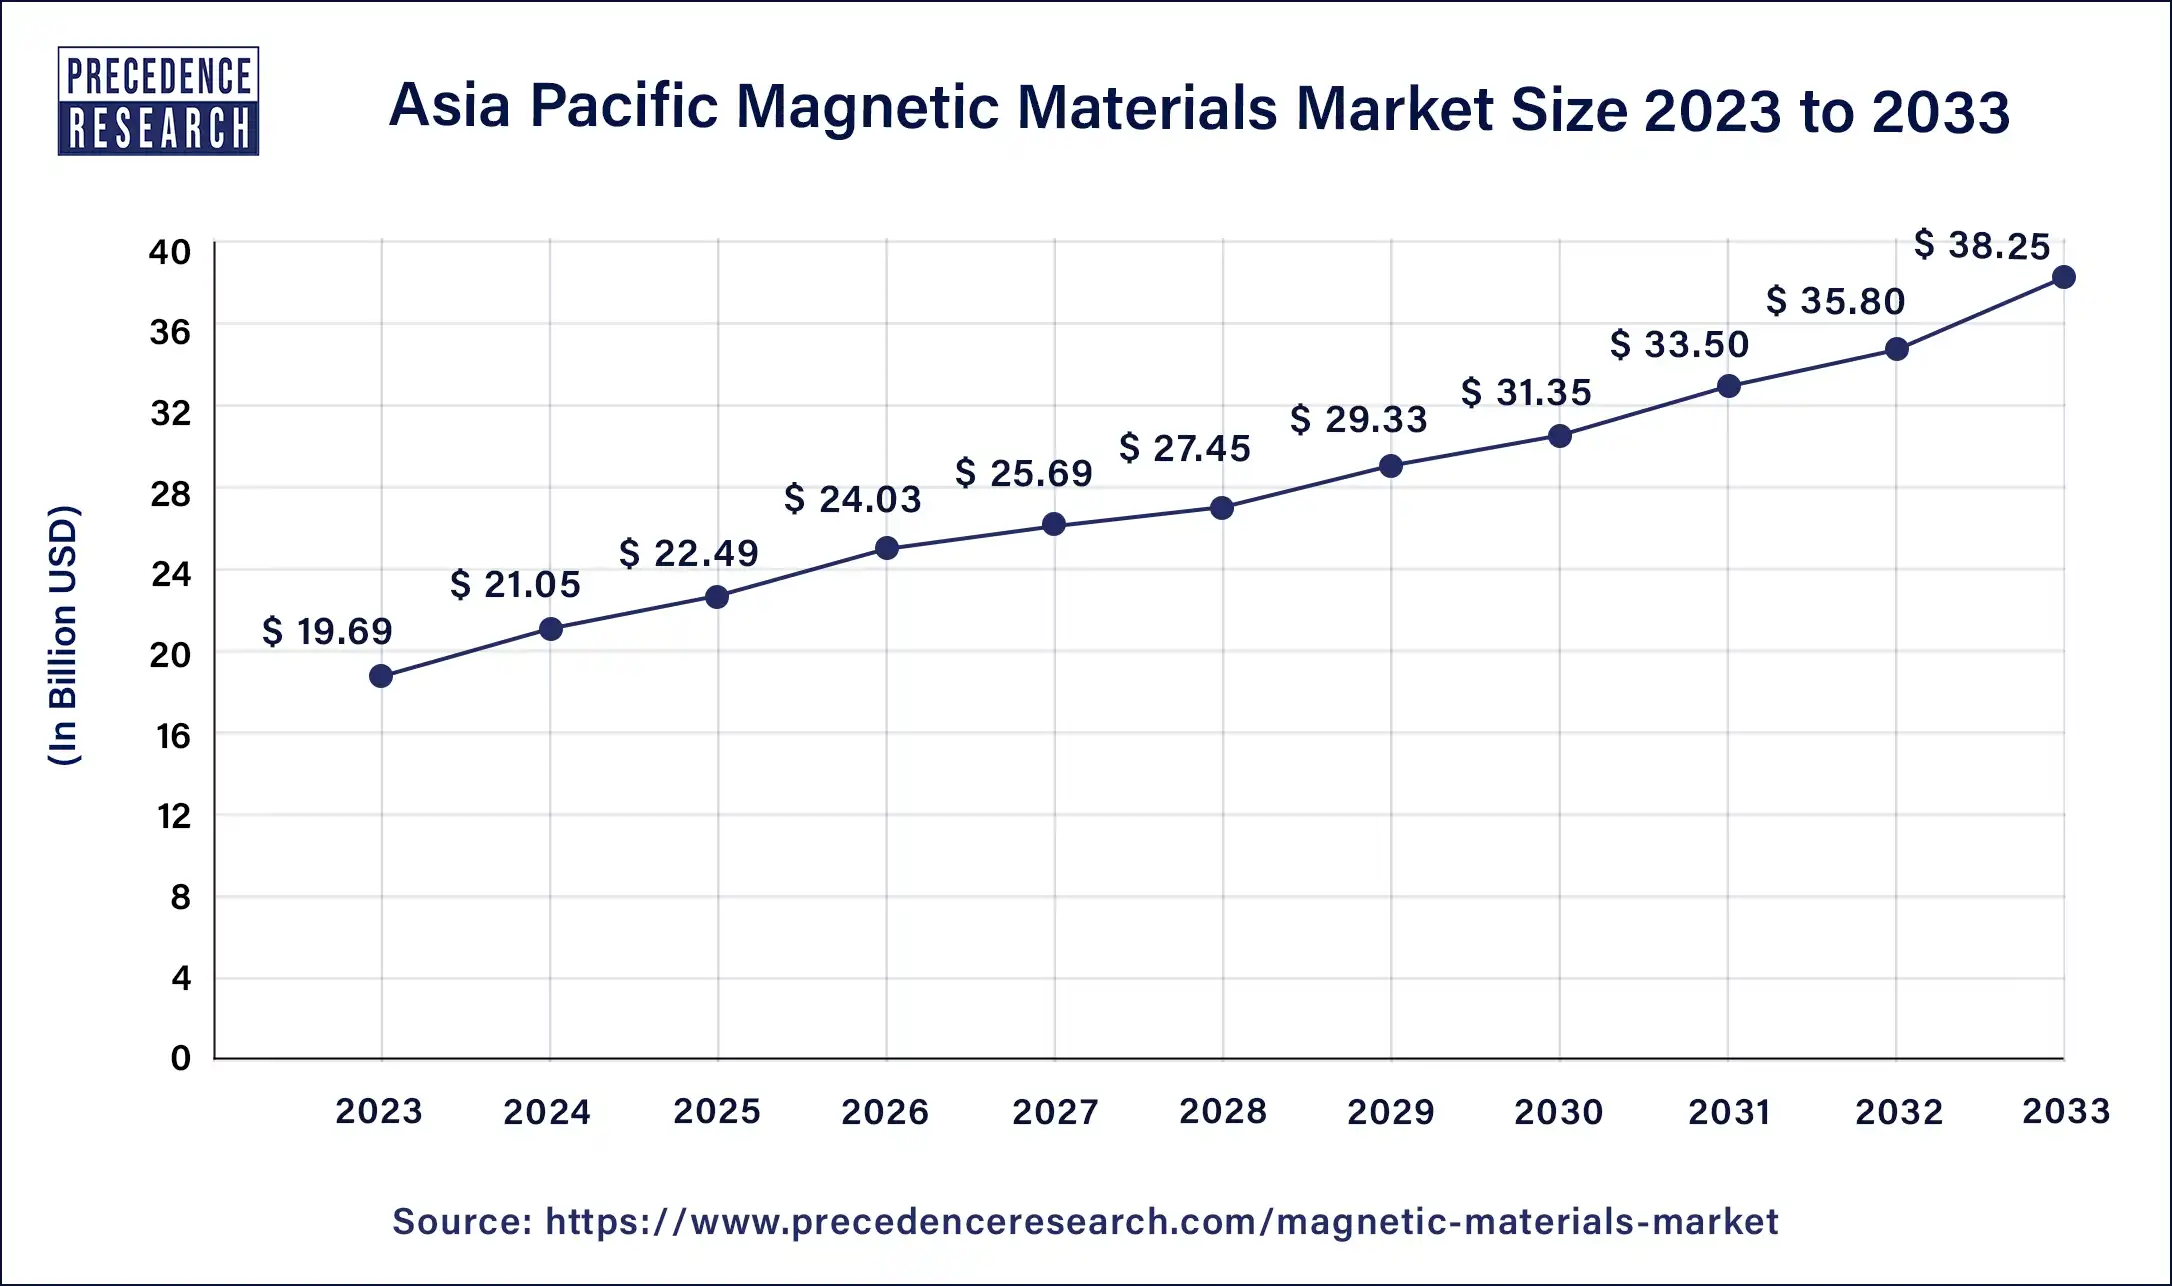 Asia Pacific Magnetic Materials Market Size 2024 to 2033